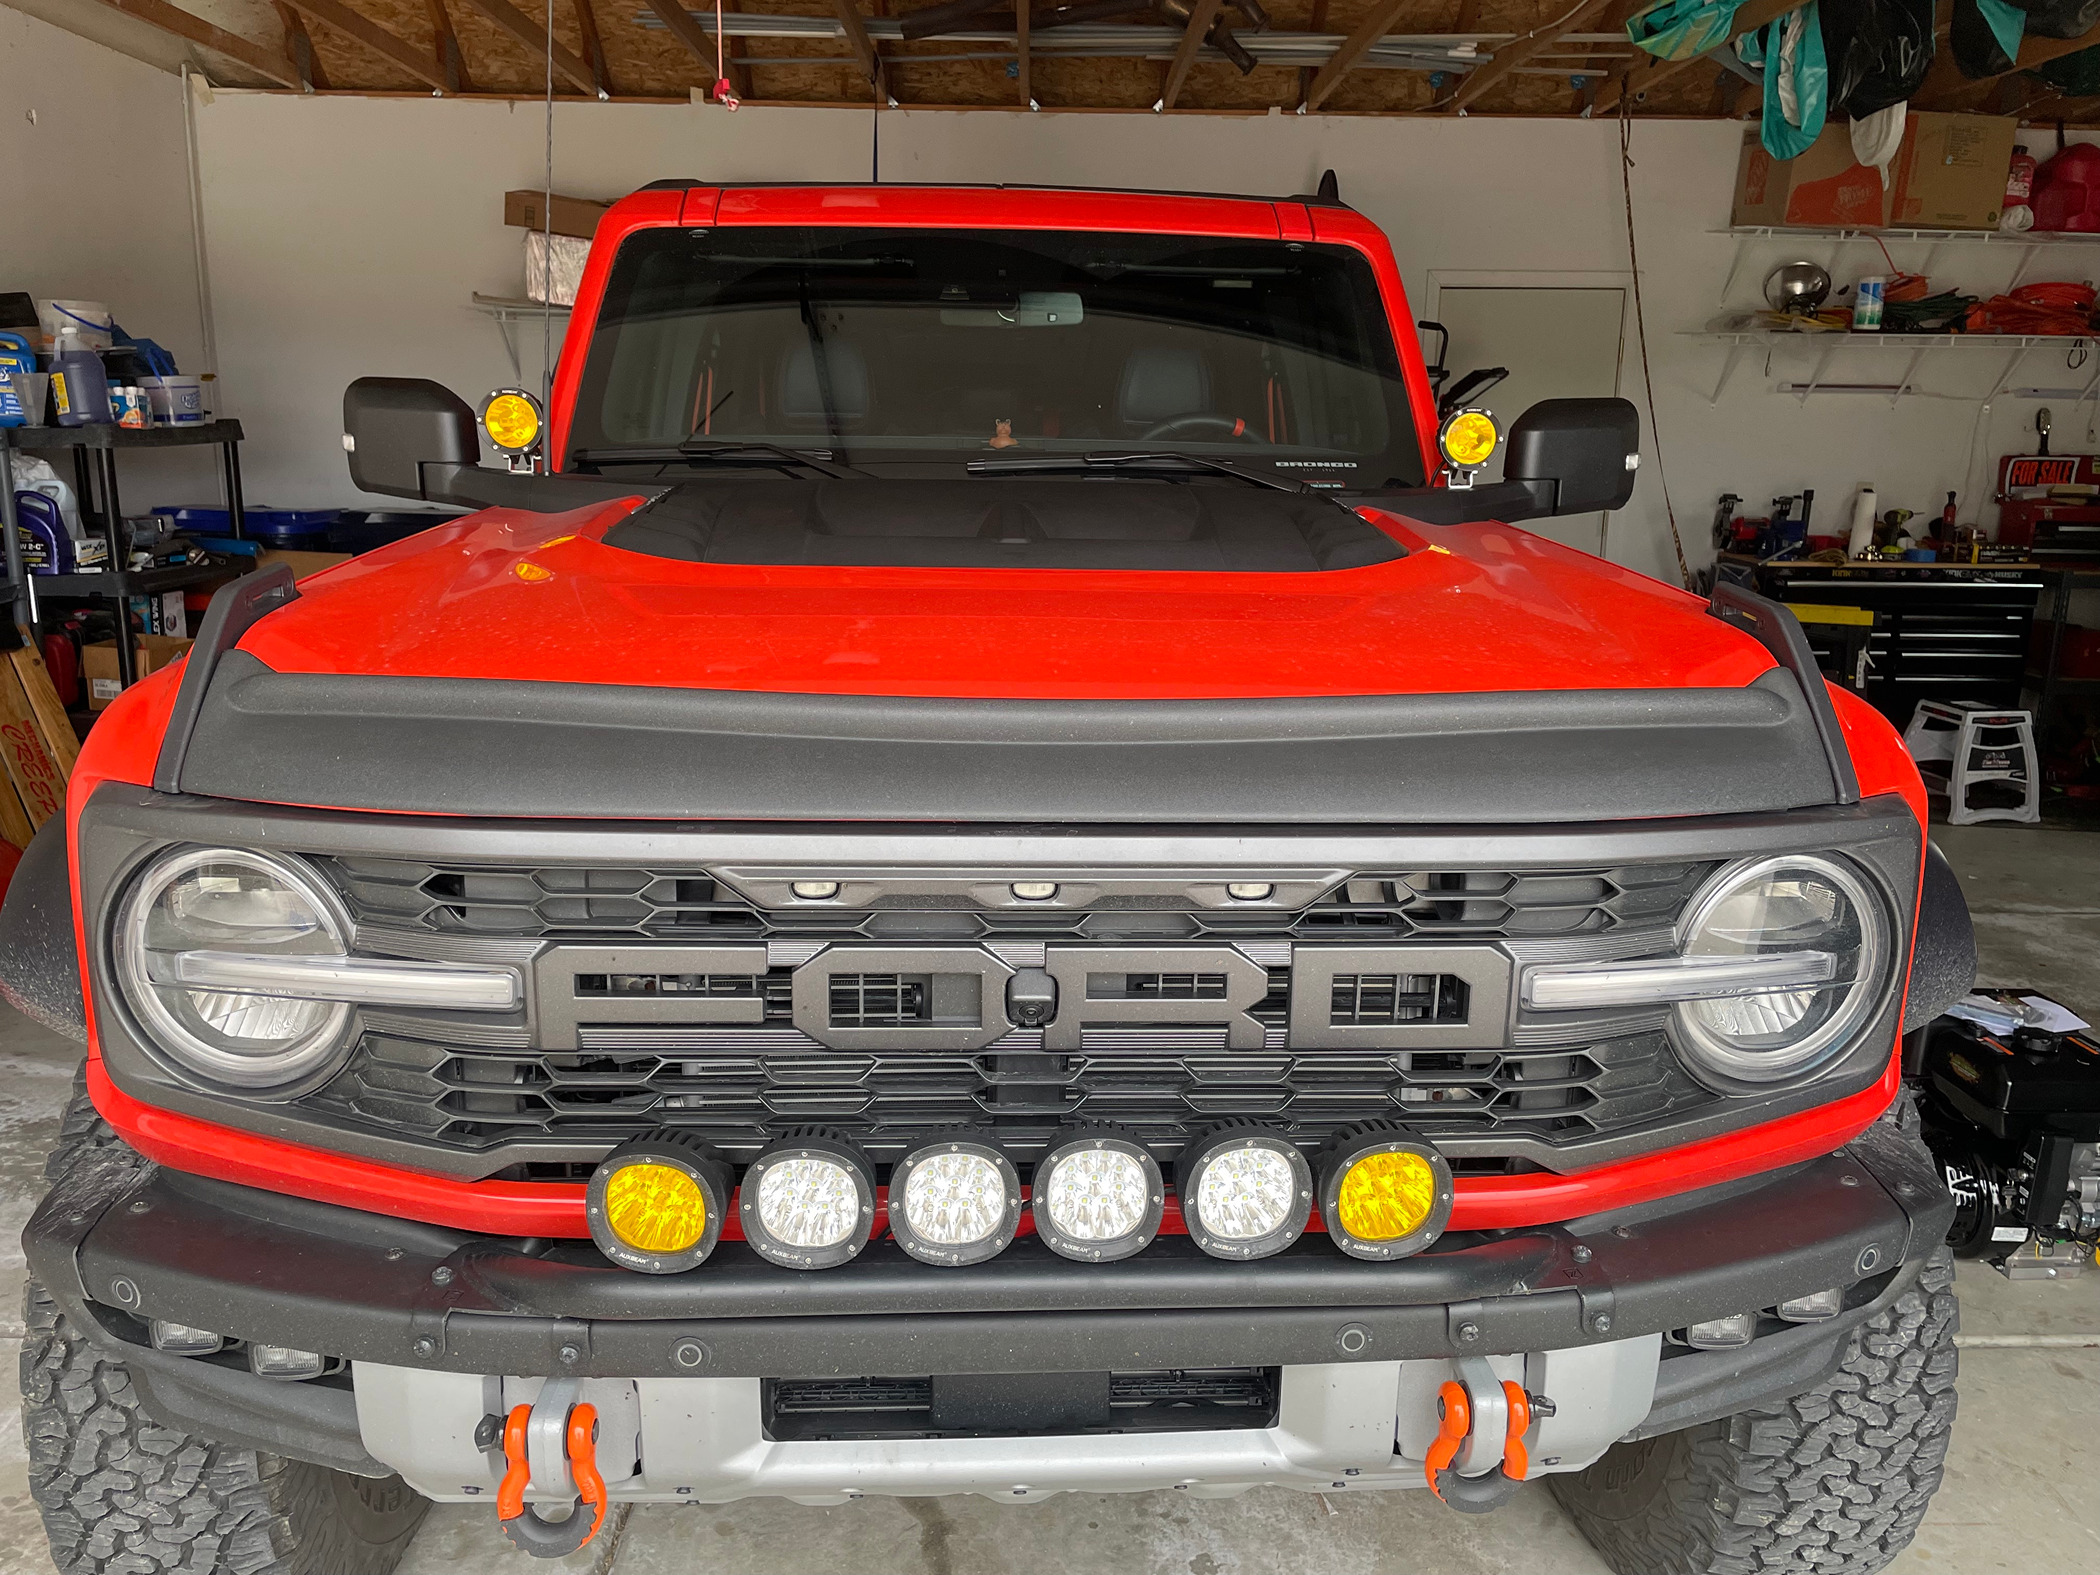 Ford Bronco Front End Friday! Show off your Bronco! IMG_2808